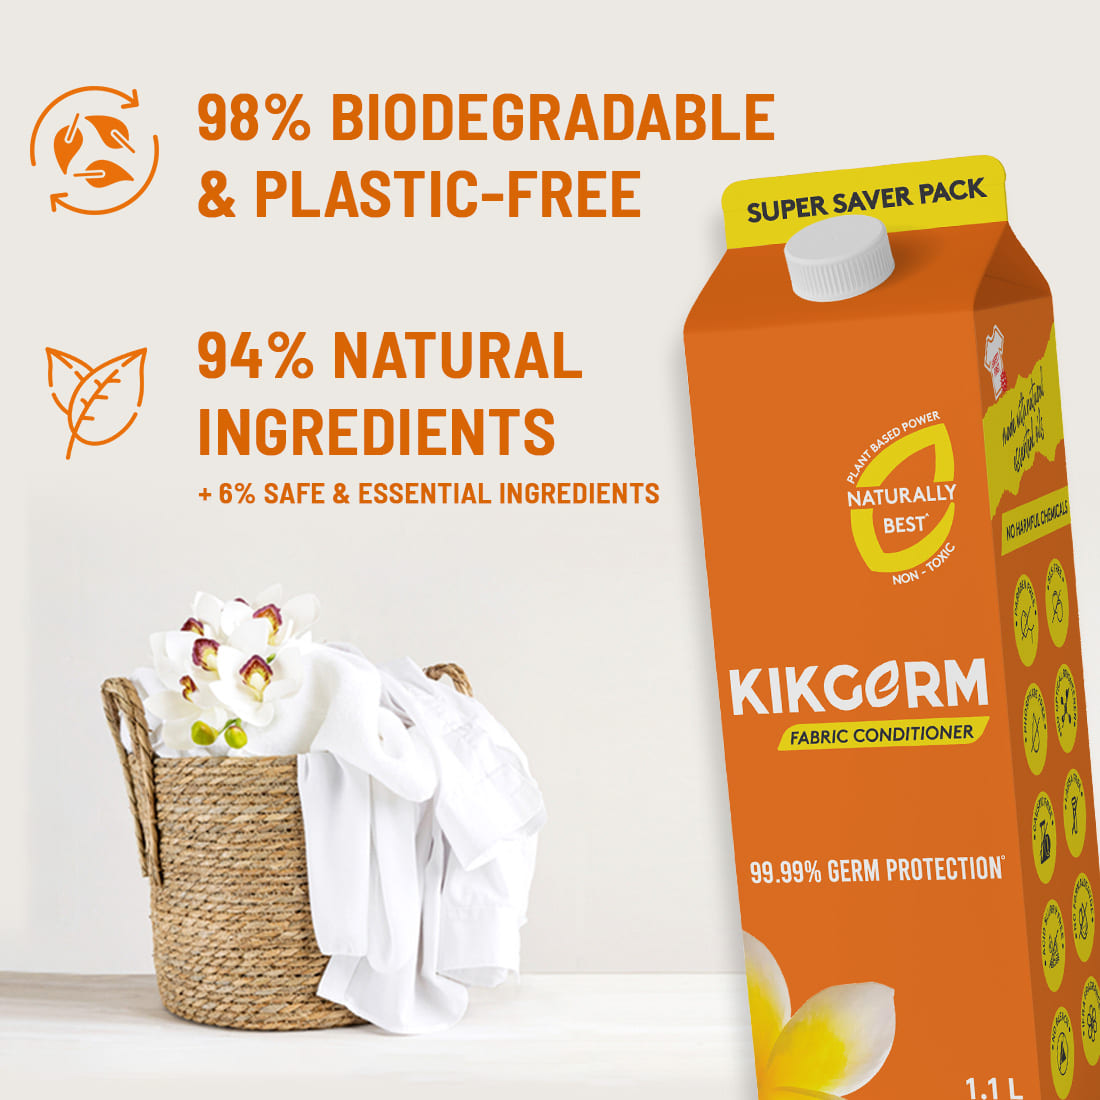 KIKGERM Naturally Best Fabric Conditioner | No Harmful Chemicals & 99.99% Germ Protection | New & Shiny Clothes | 1.1L X 3 (3300ML)